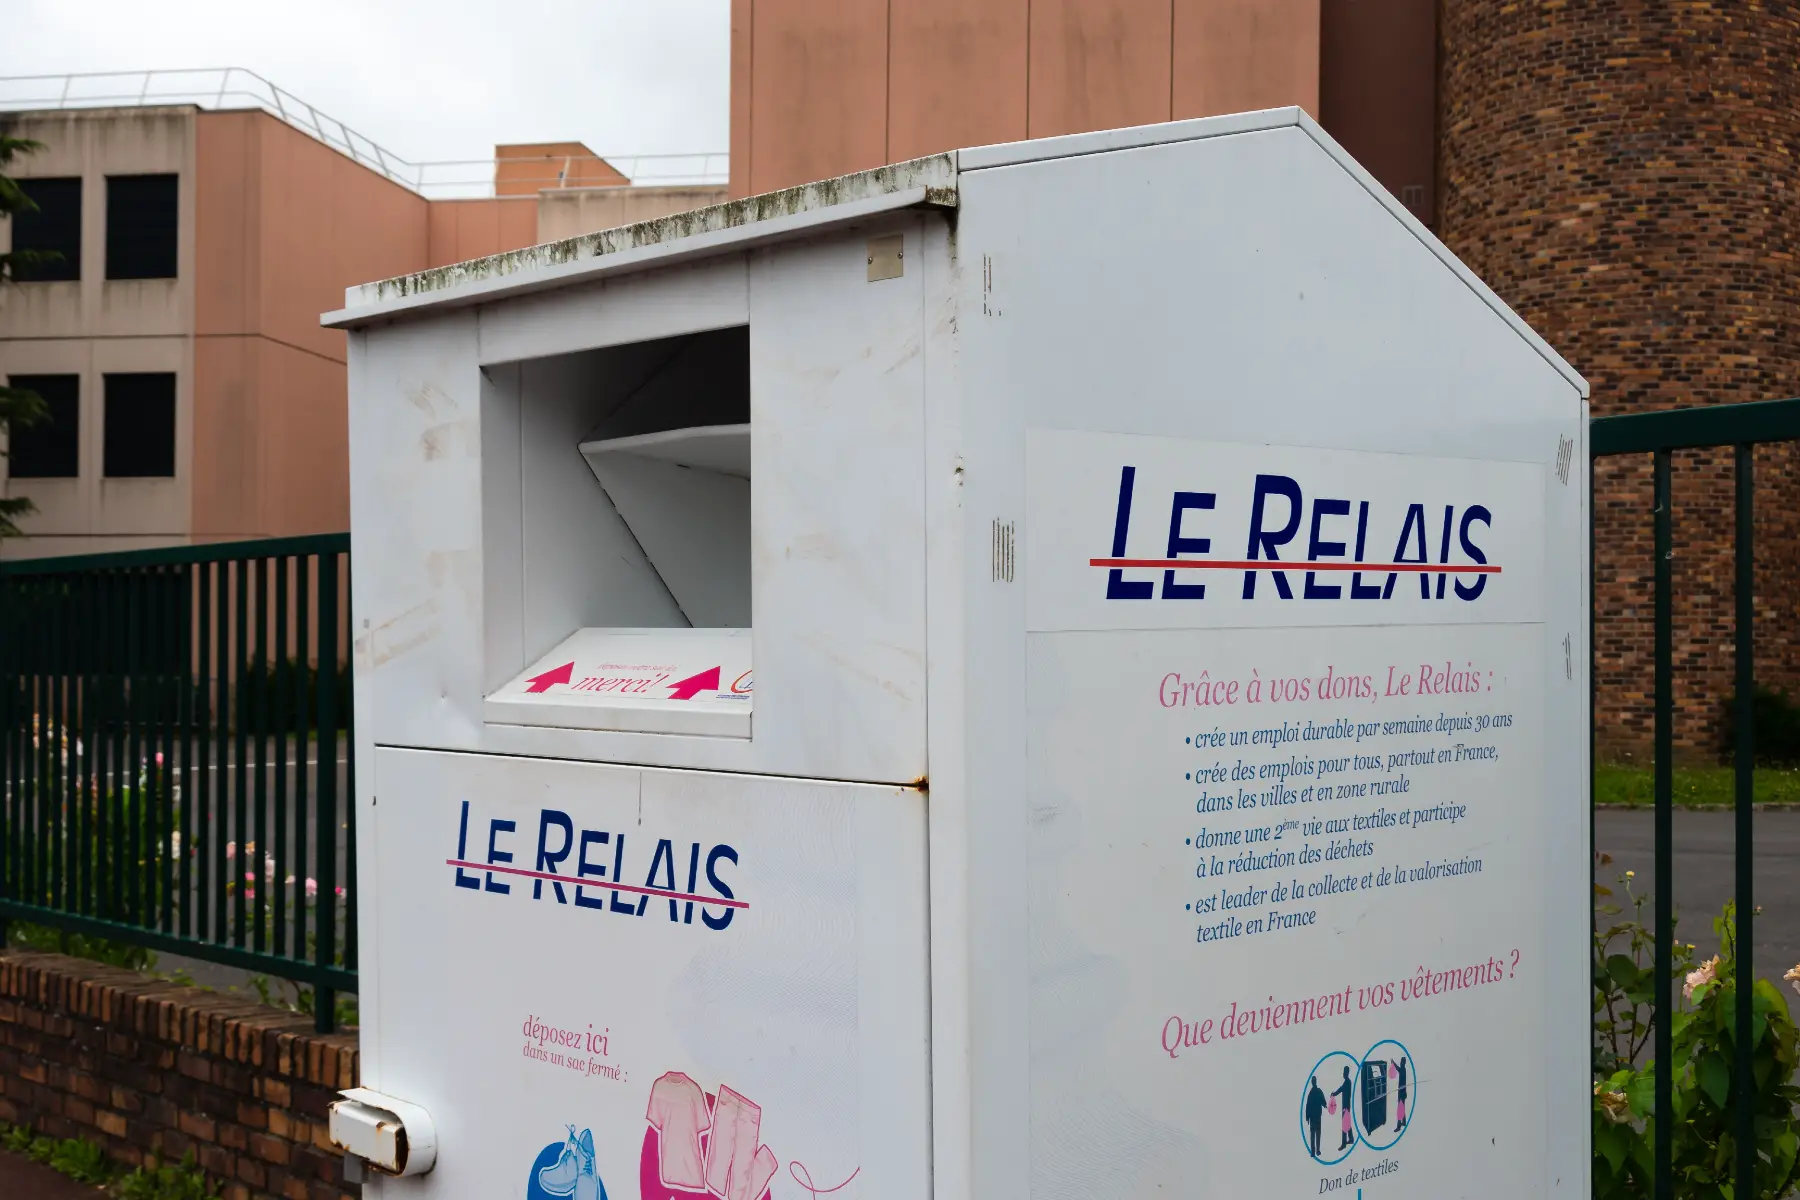 Textile recycling bin for social enterprise Le Relais. It is grey, about two meters tall and shaped like a shed.